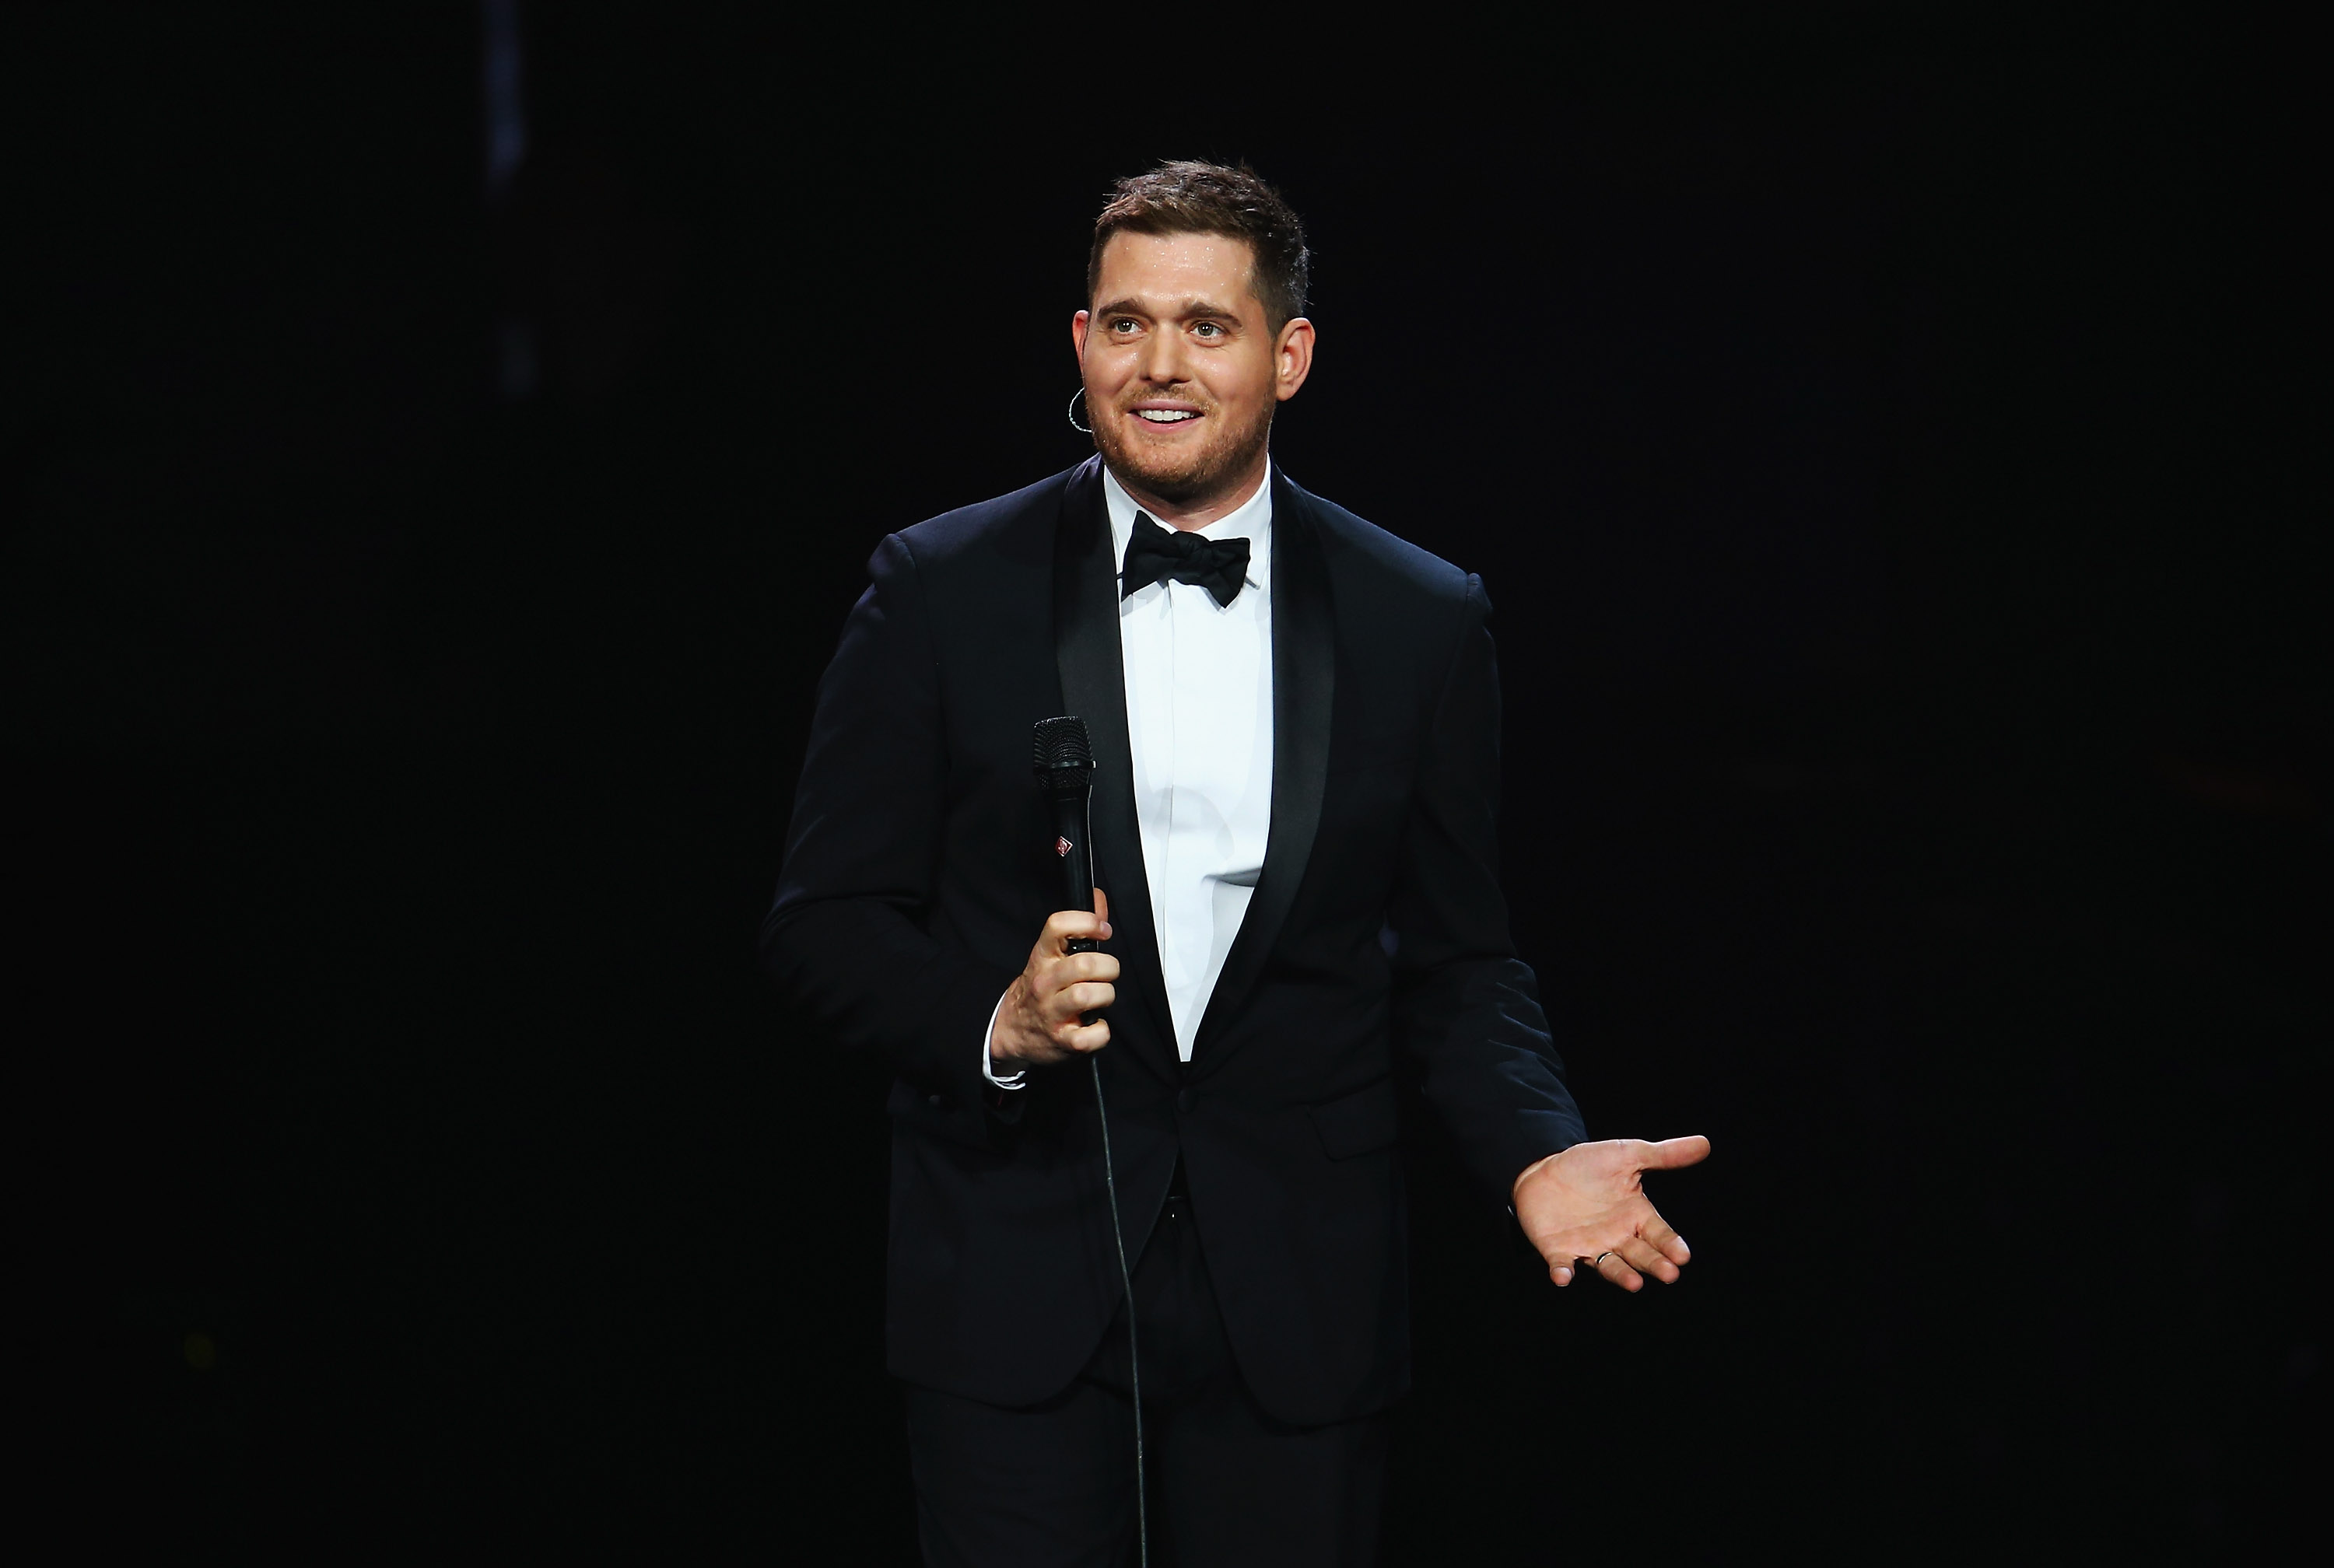 Michael Buble performs live at Allphones Arena on May 9, 2014 in Sydney, Australia.